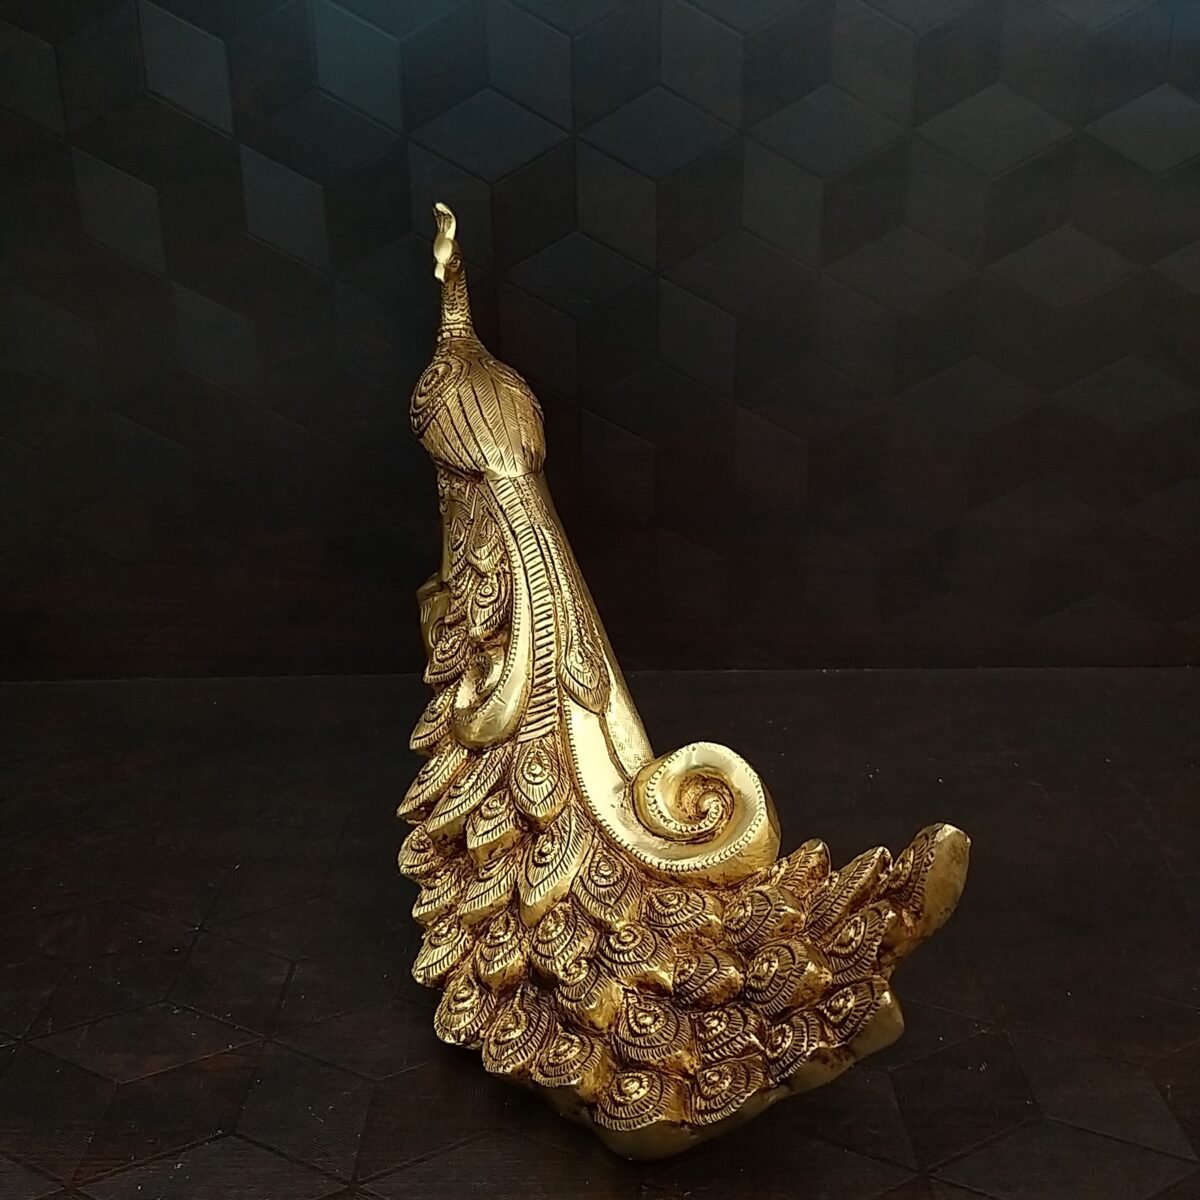 brass peacock pair idol home decor pooja items hindu god statues gift buy online india 10256 4